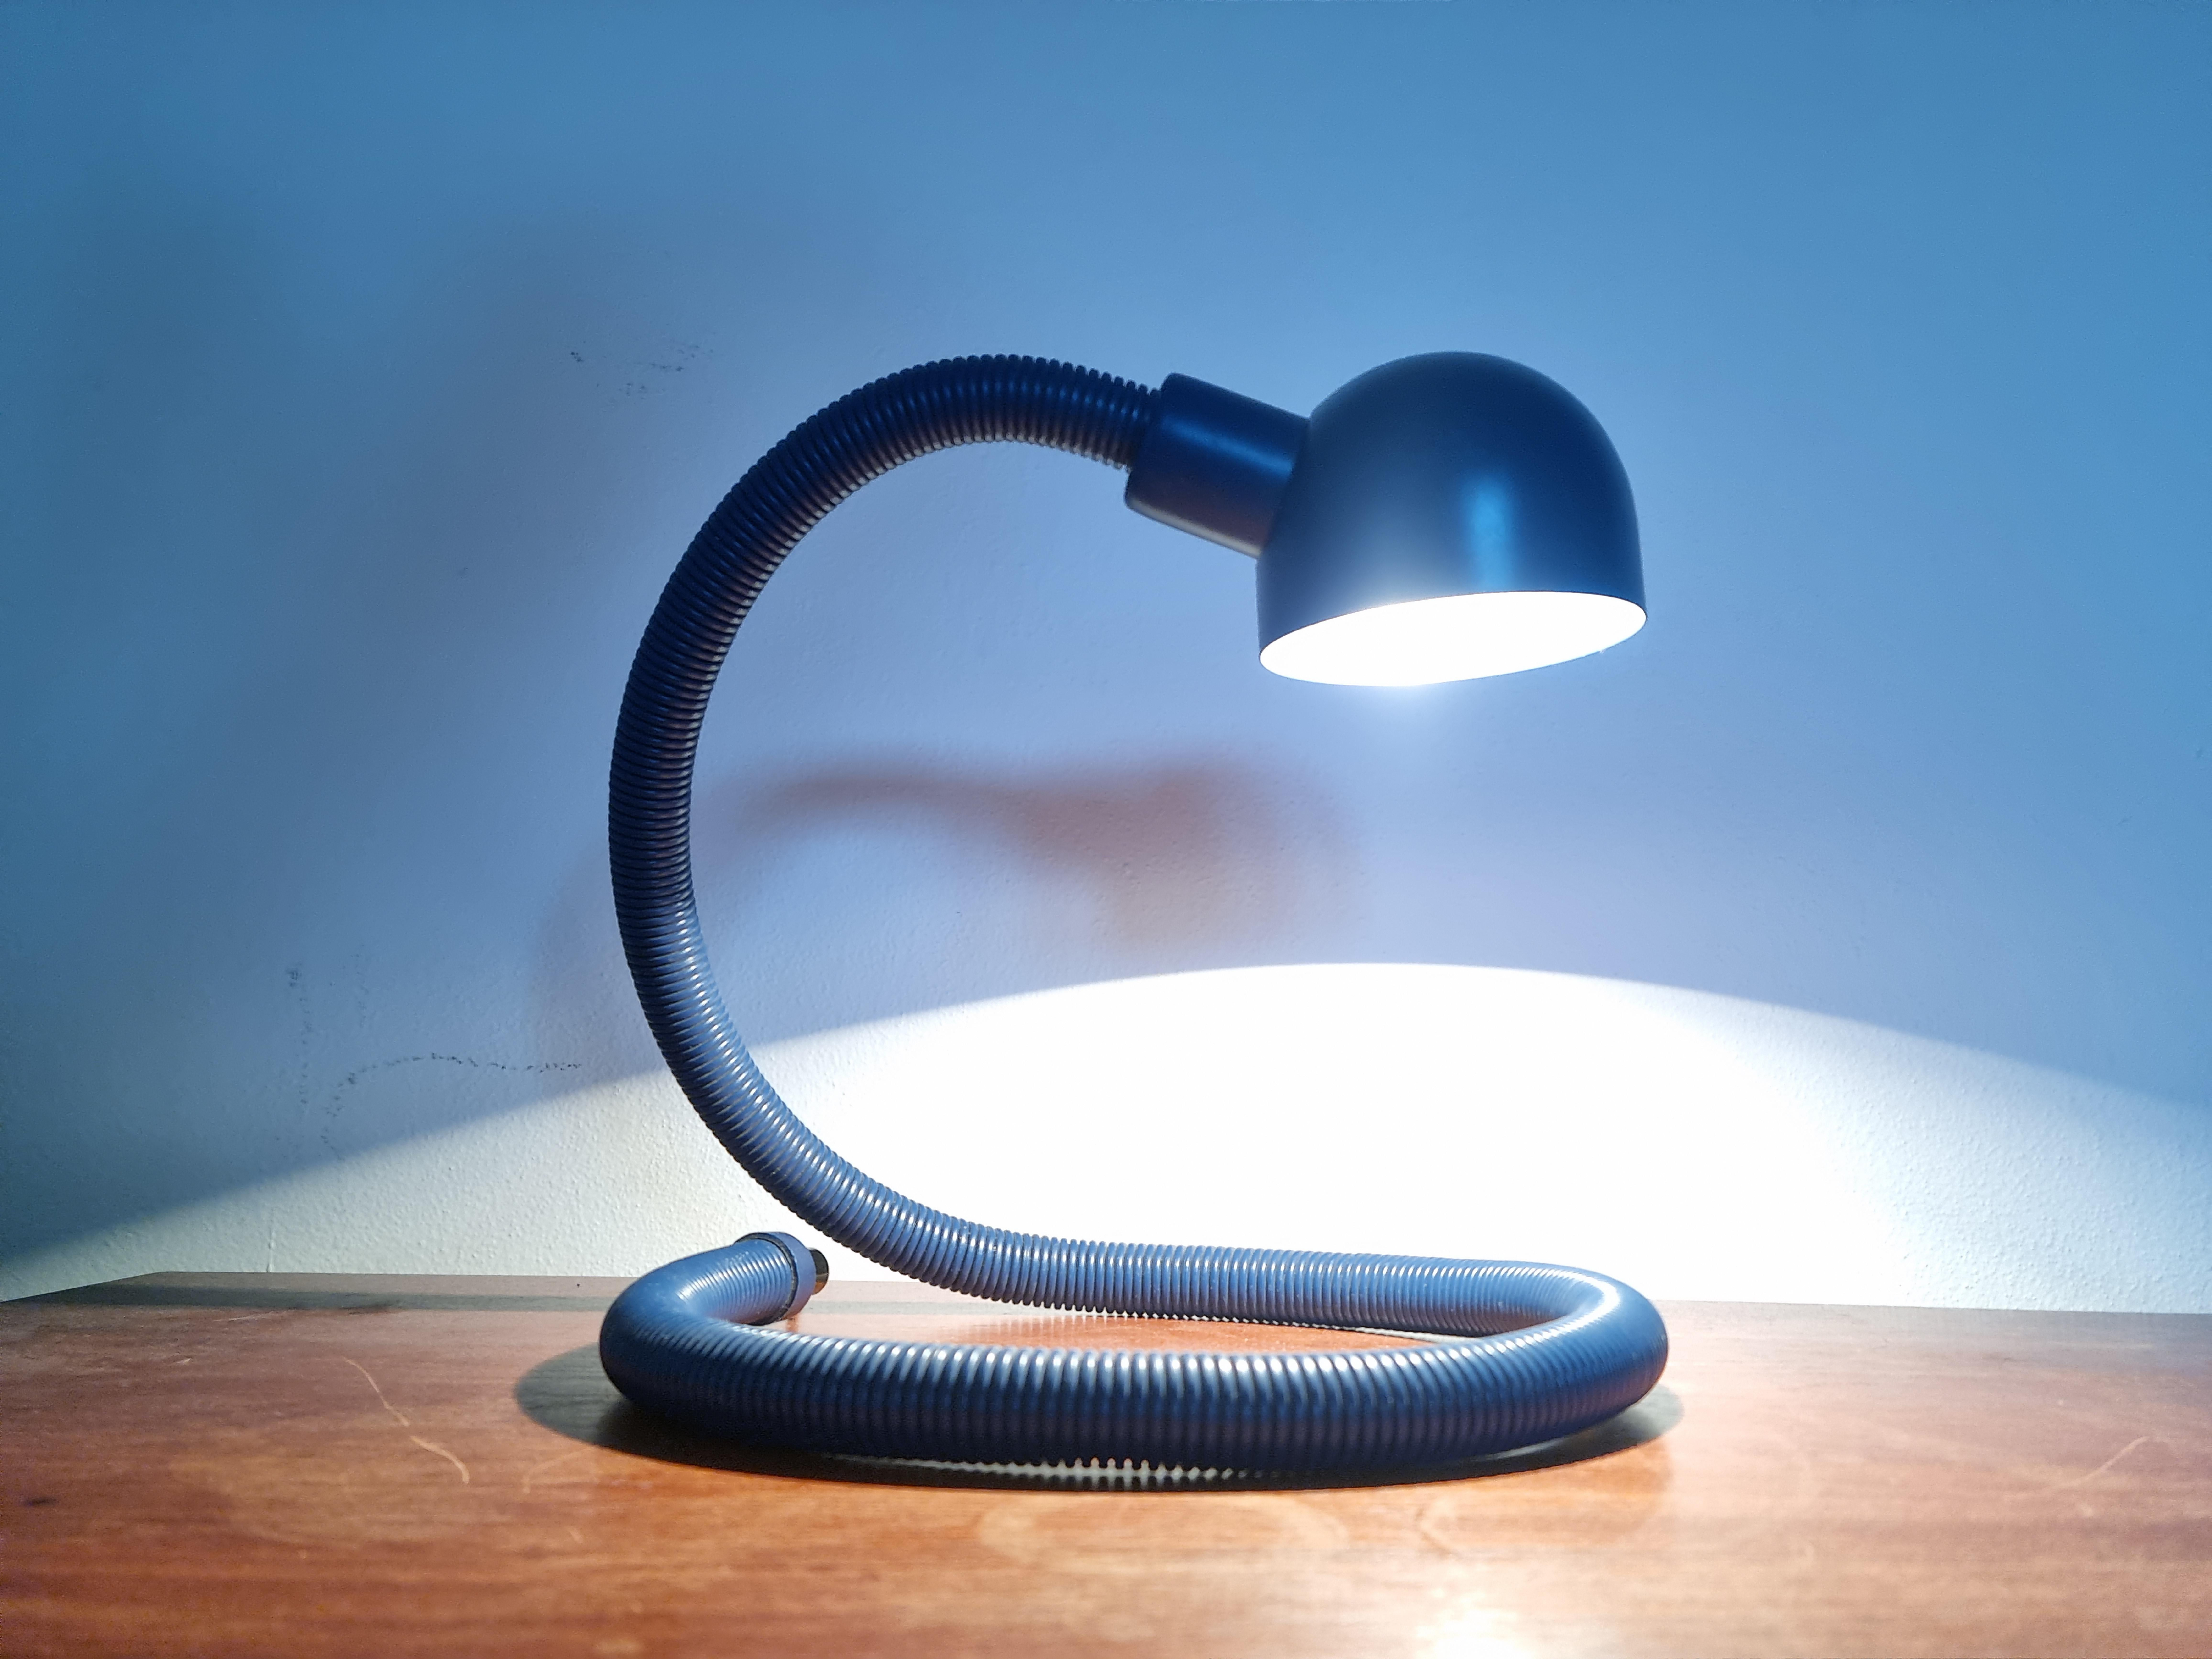 Lacquered Midcentury Adjustable Iconic Table Lamp Hebi, Isao Hosoe, Valenti Luce, 1970s For Sale